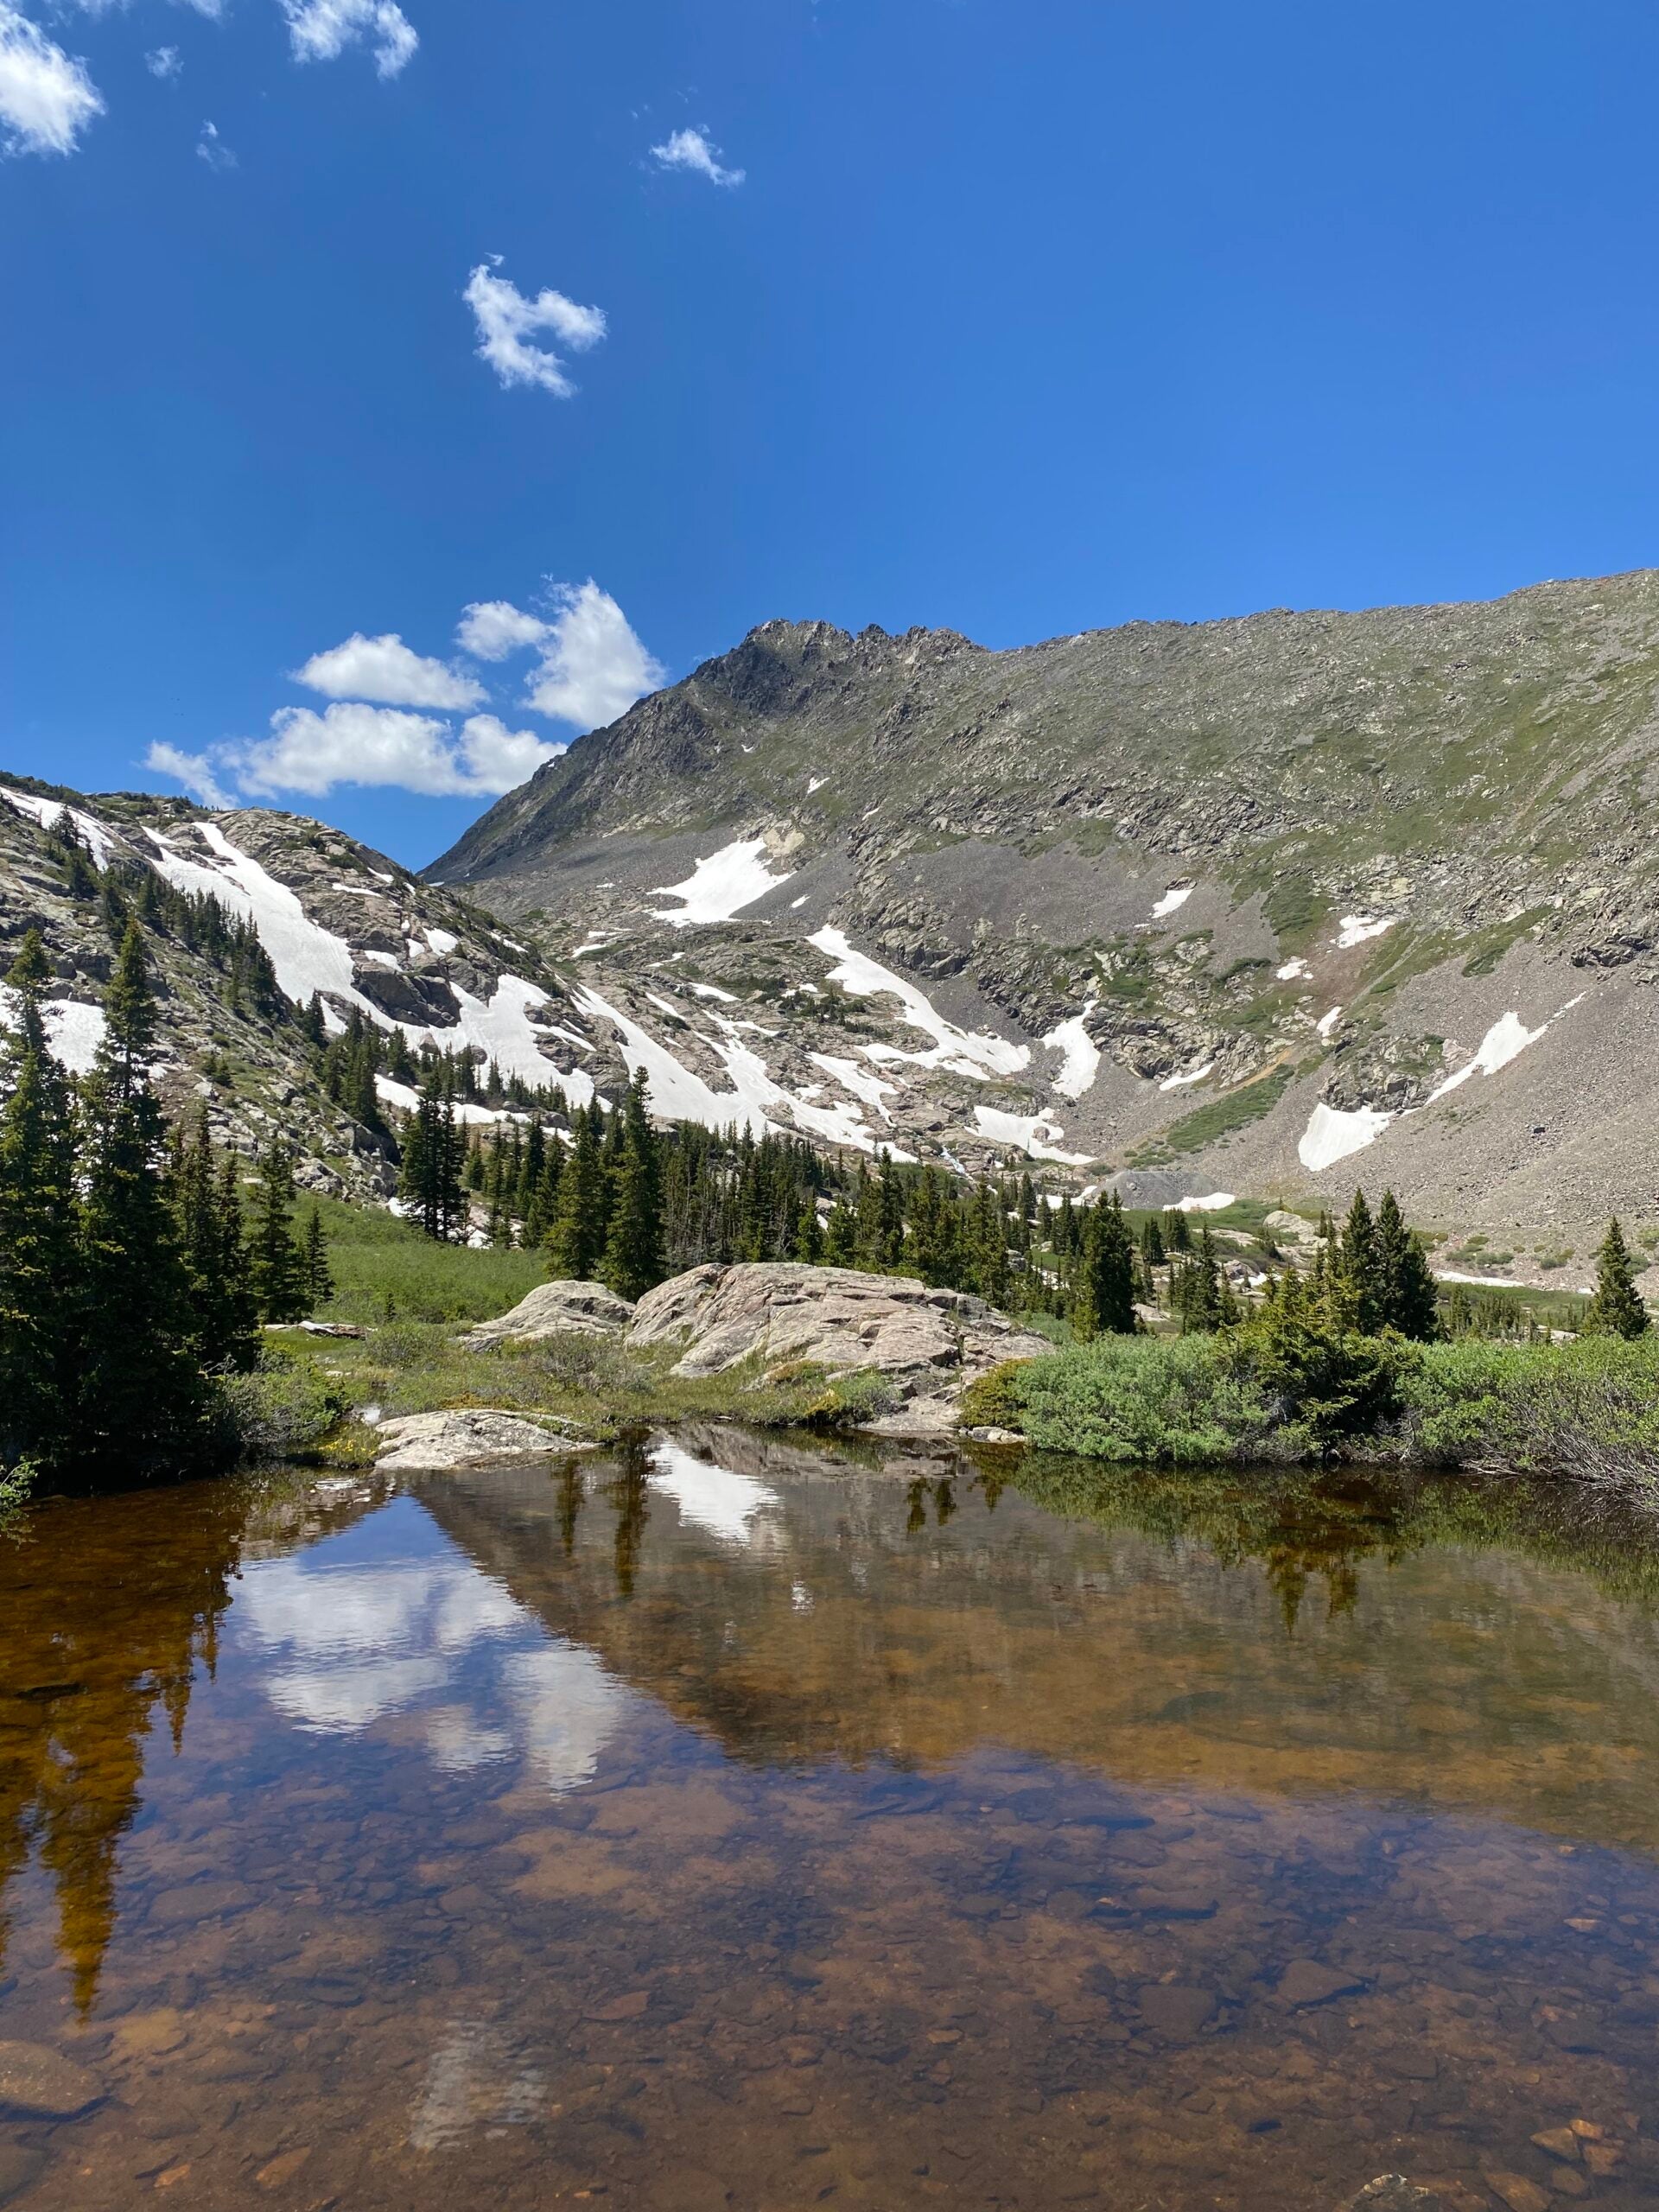 High alpine lakes are an excellent place to try backcountry fishing.